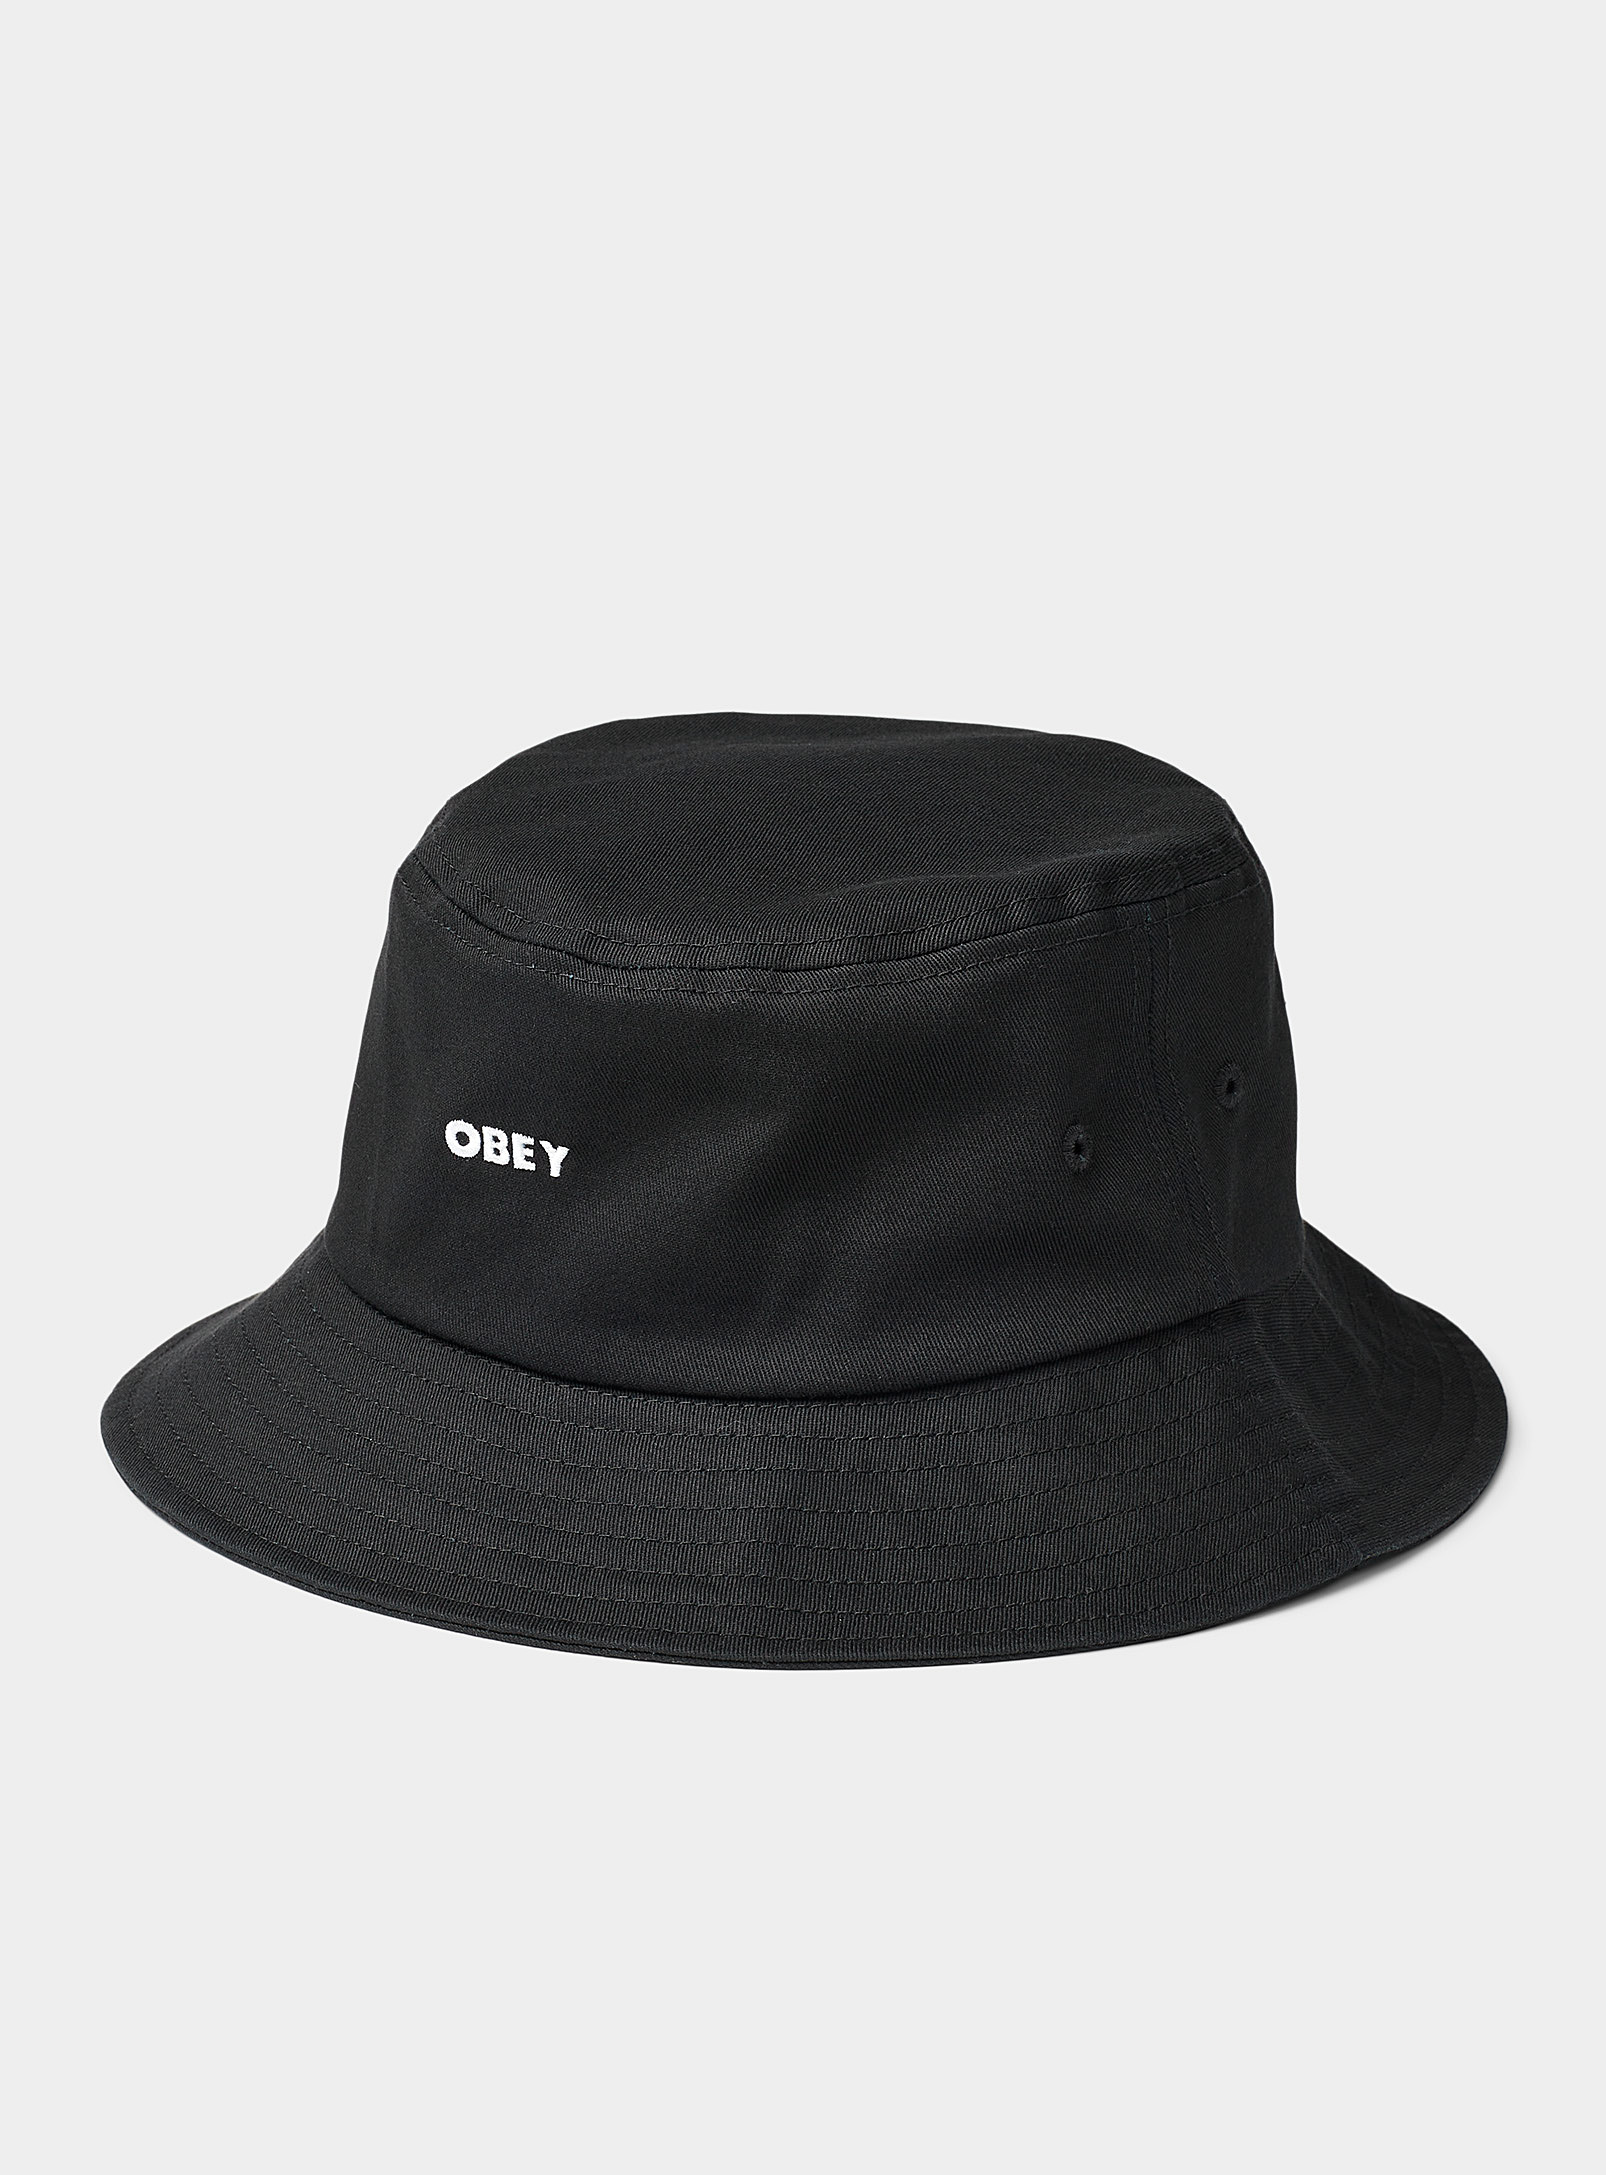 Obey Embroidered Logo Bucket Hat In Black